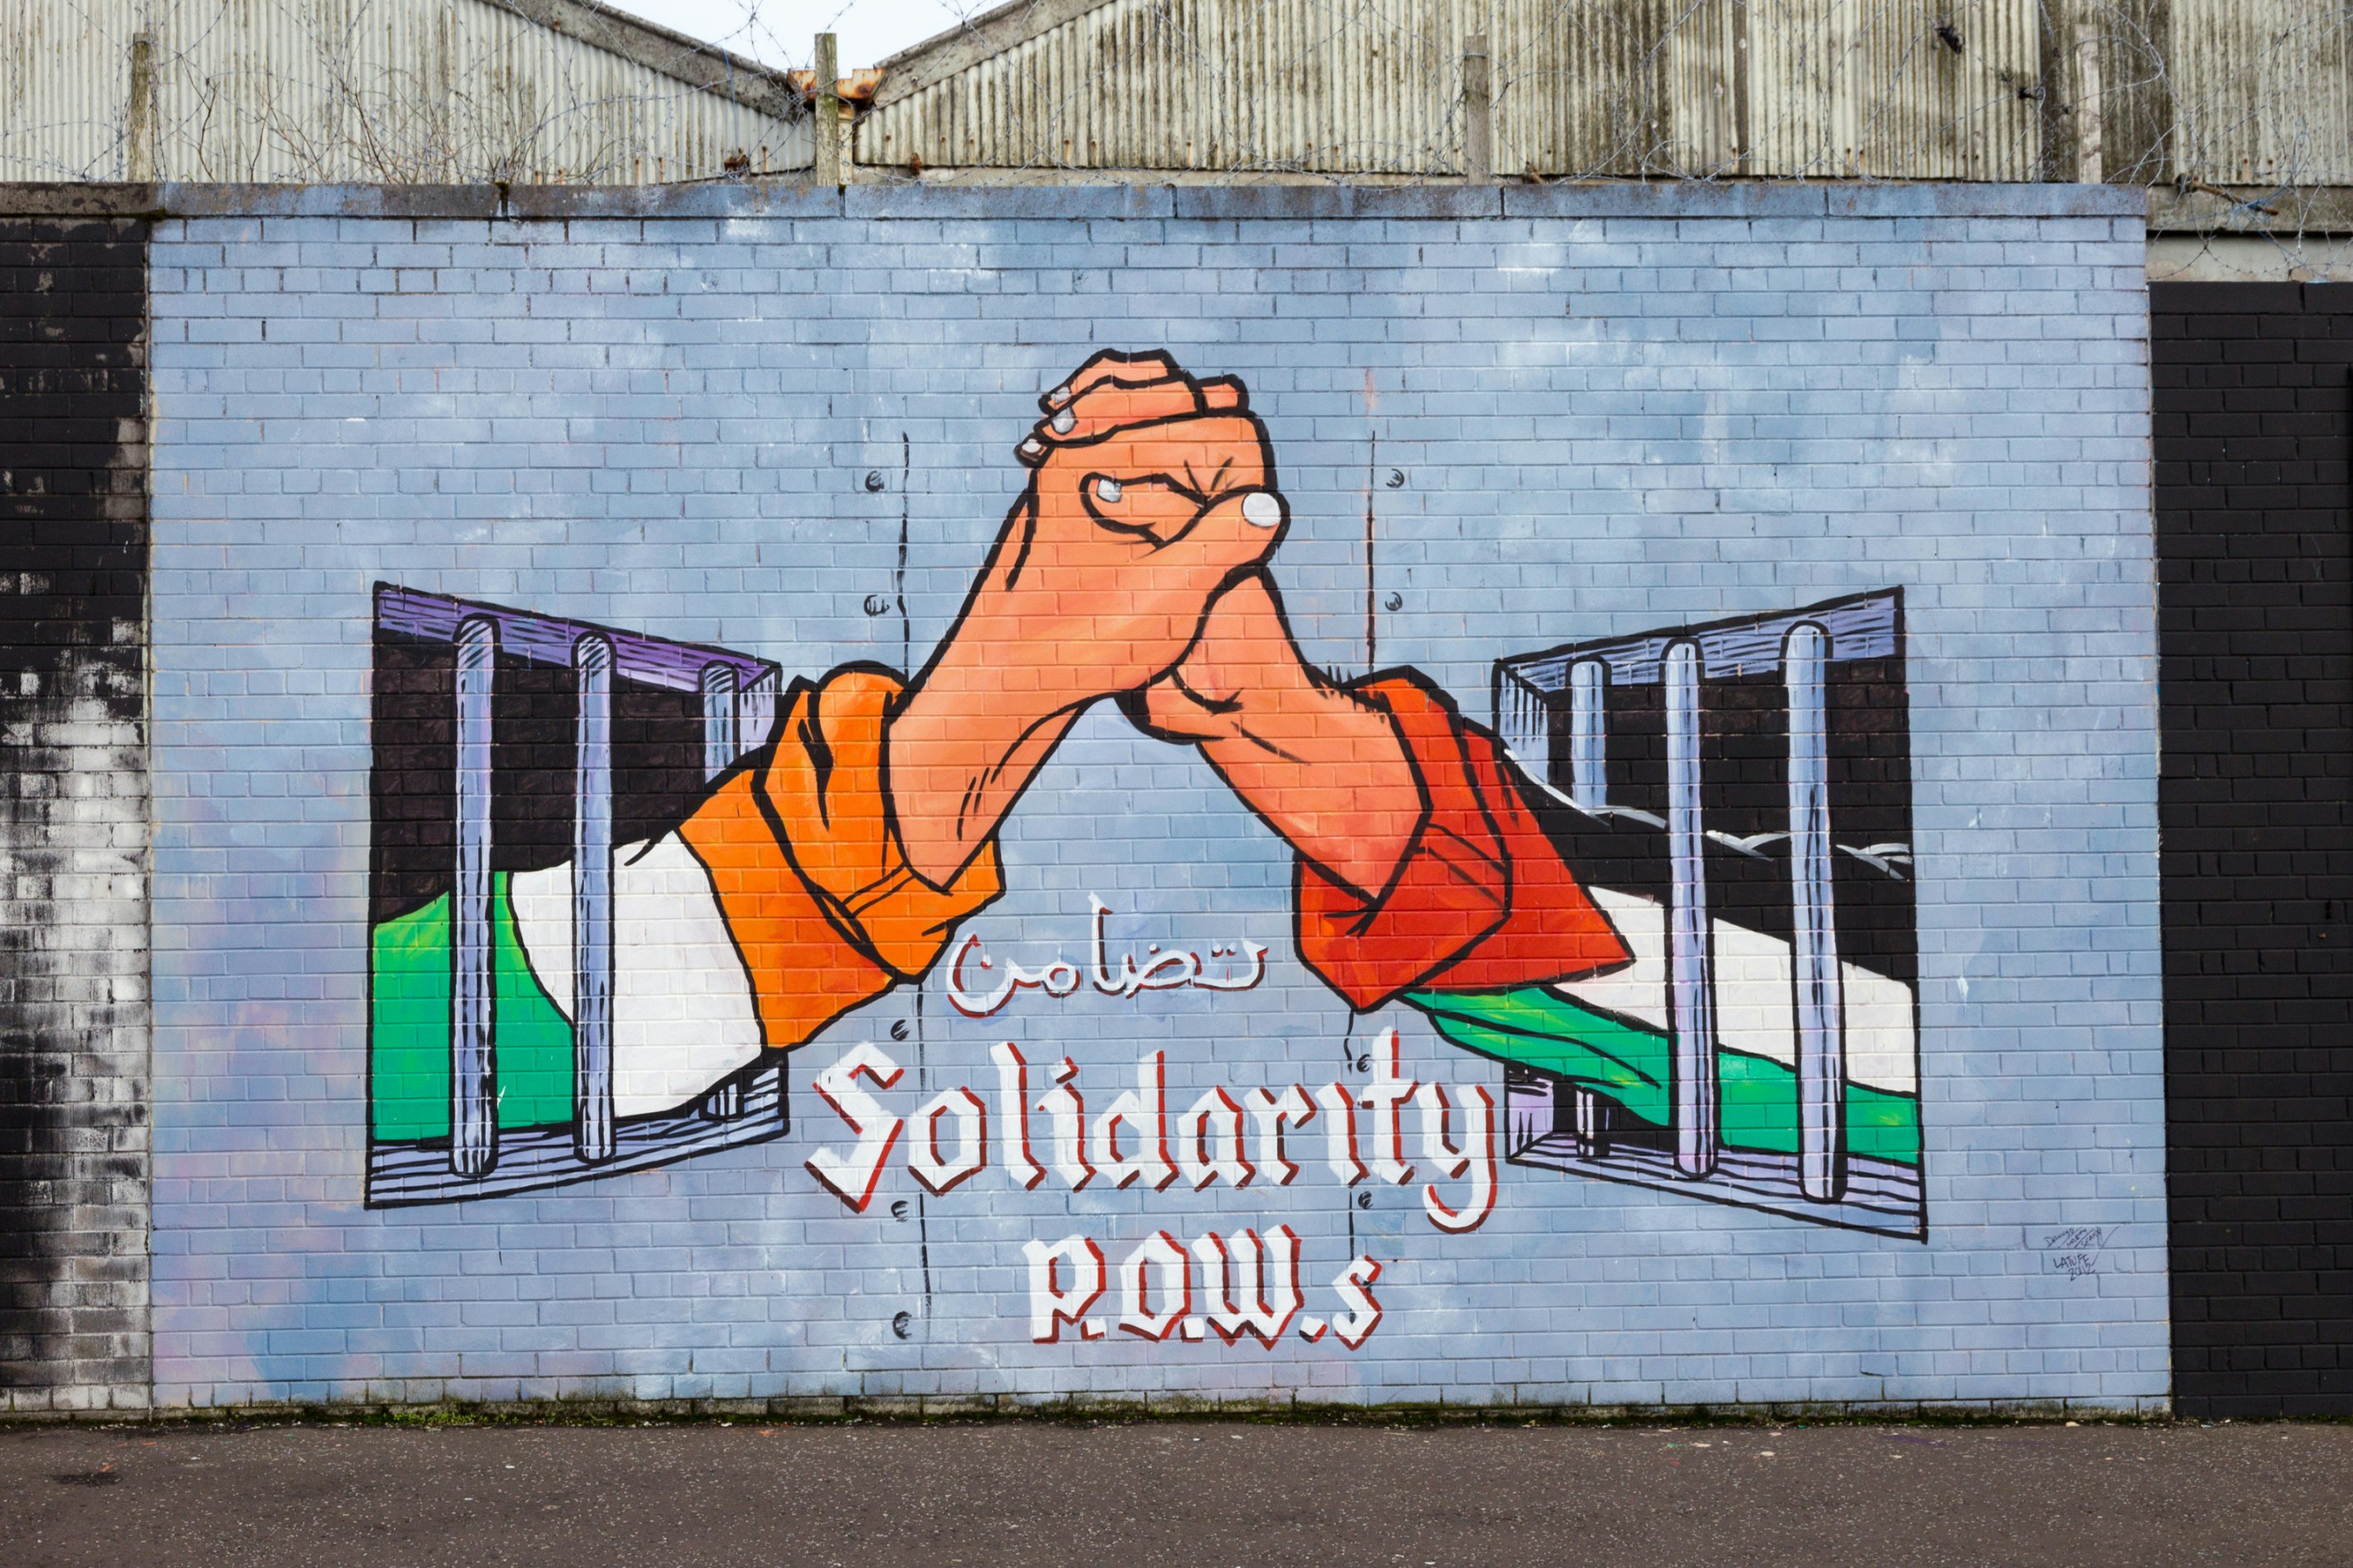 BELFAST, NORTHERN IRELAND - FEB 9, 2014: Political mural in Belfast, Northern Ireland. Falls Road is famous for its political murals. ; Shutterstock ID 191463122; Your name (First / Last): Lauren Gillmore; GL account no.: 56530; Netsuite department name: Online-Design; Full Product or Project name including edition: 65050/ Online Design /LaurenGillmore/IFY